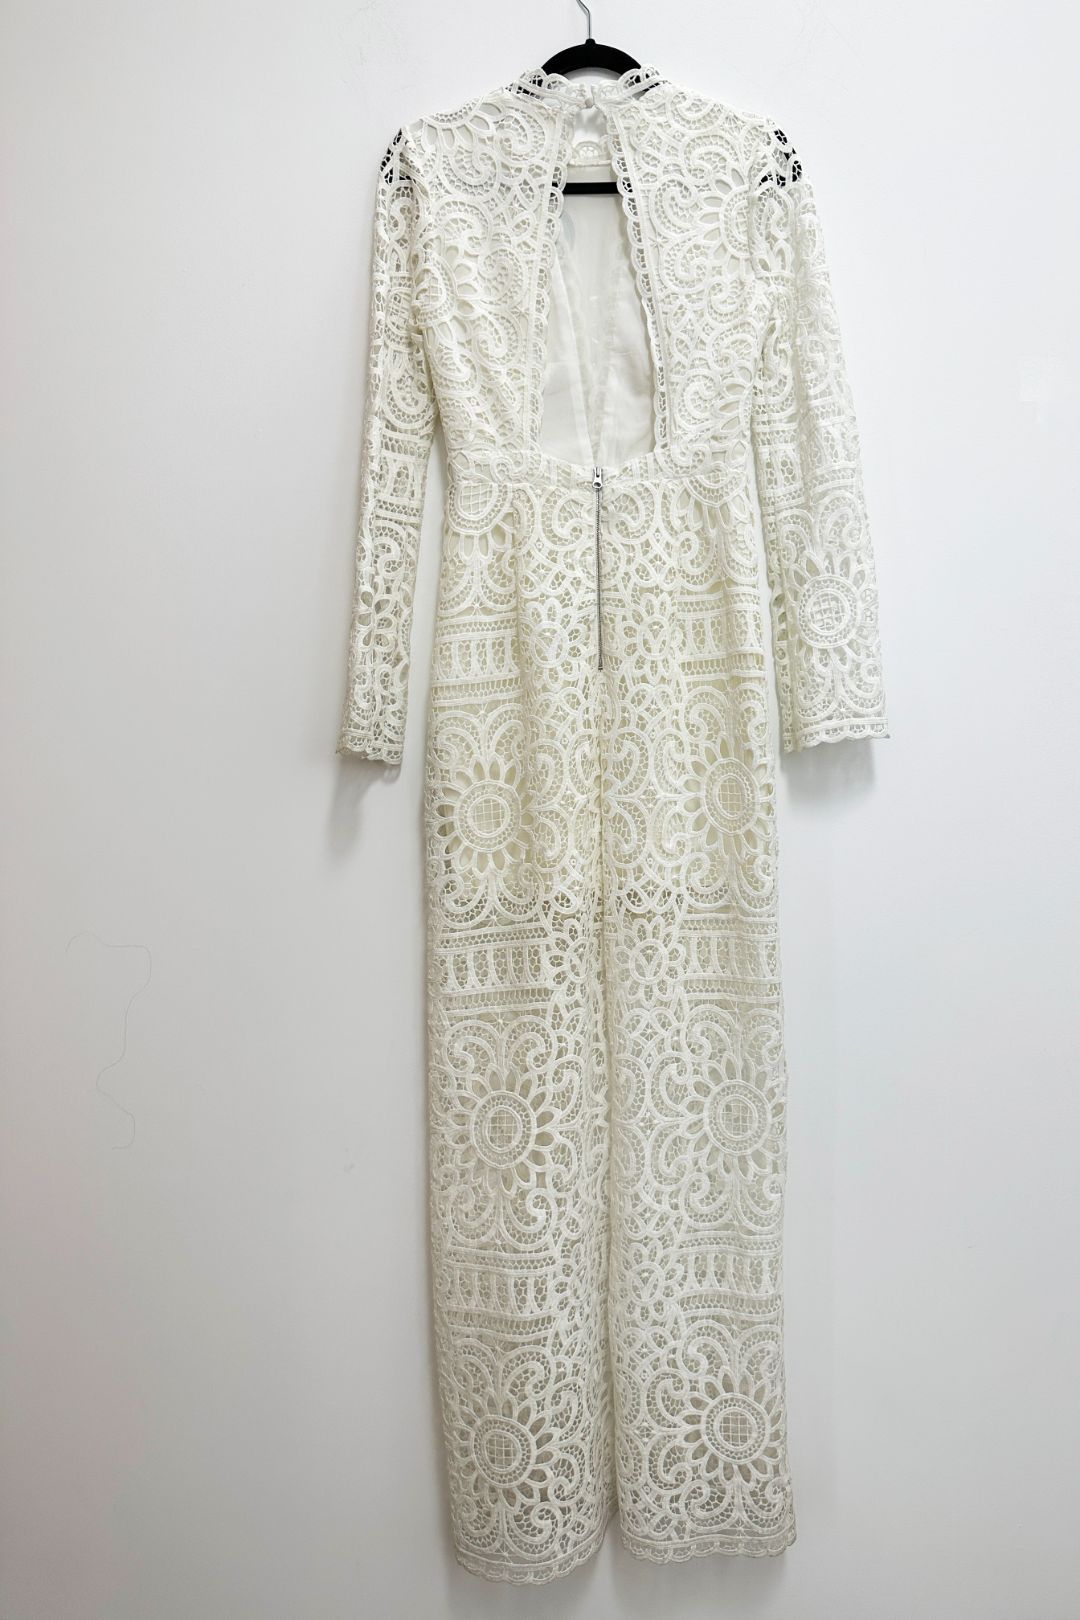 Grace and Hart Long Sleeve White Lace Formal Dress